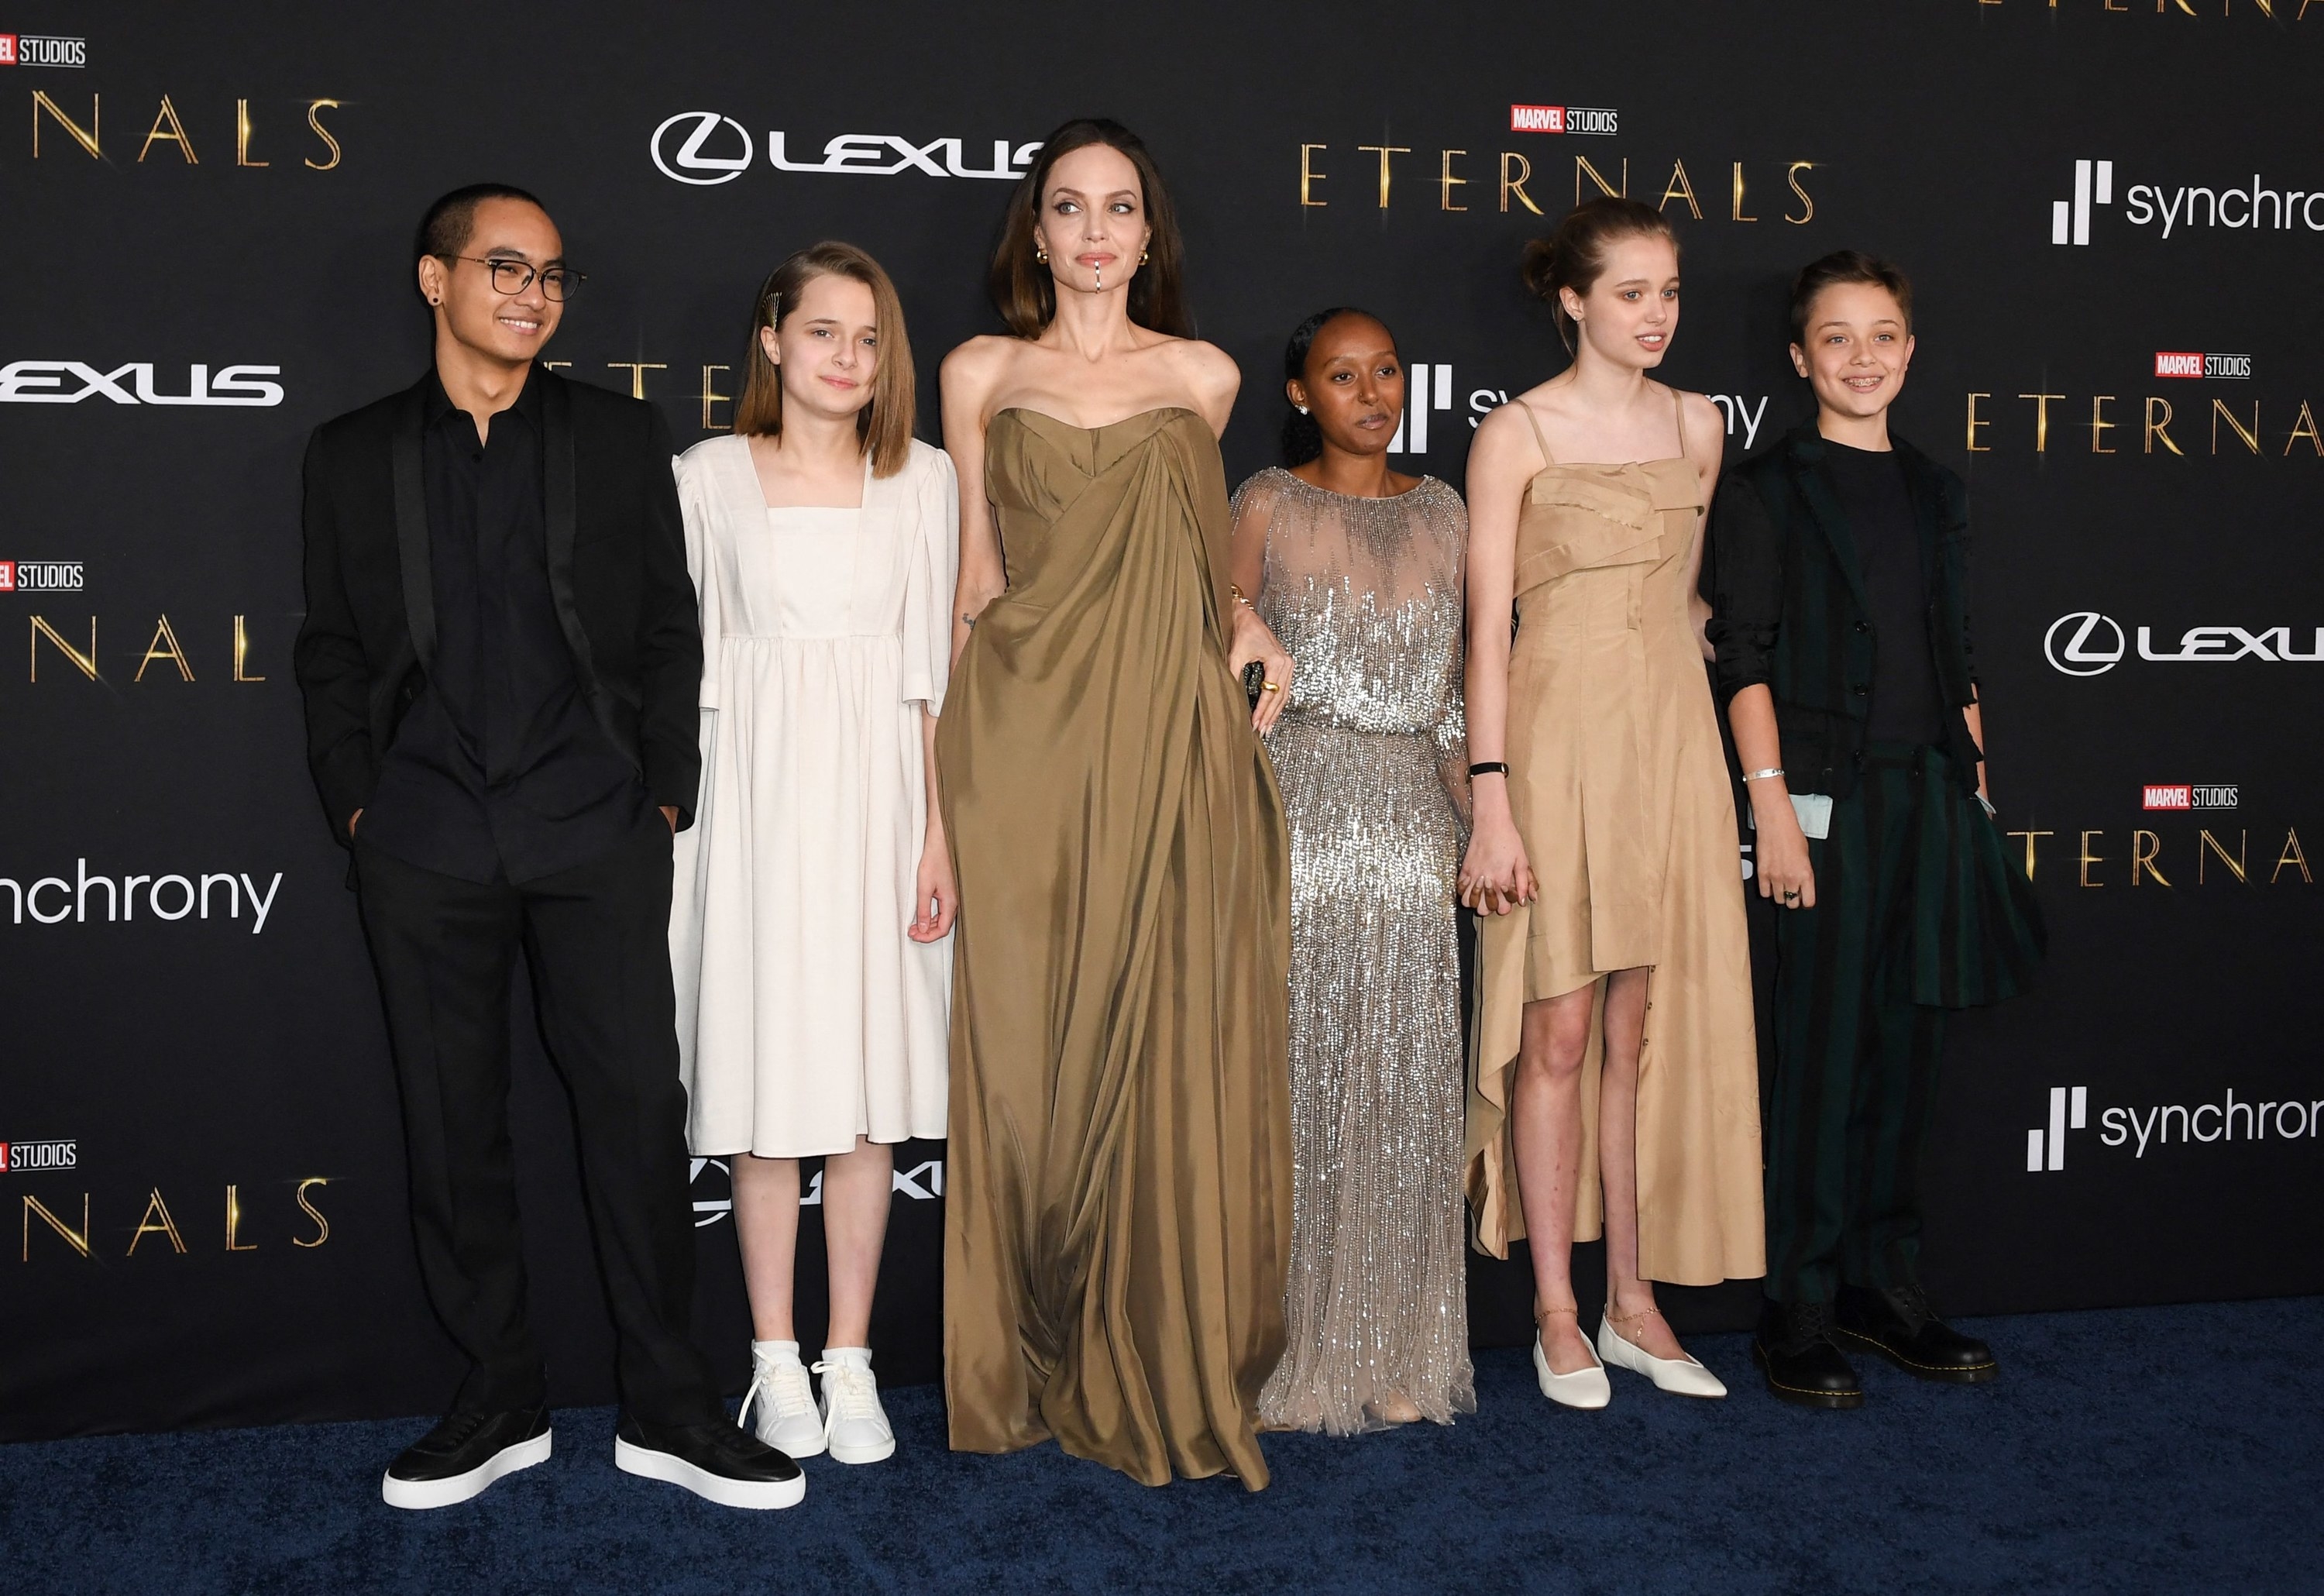 Angie and five of her kids on the Eternals red carpet